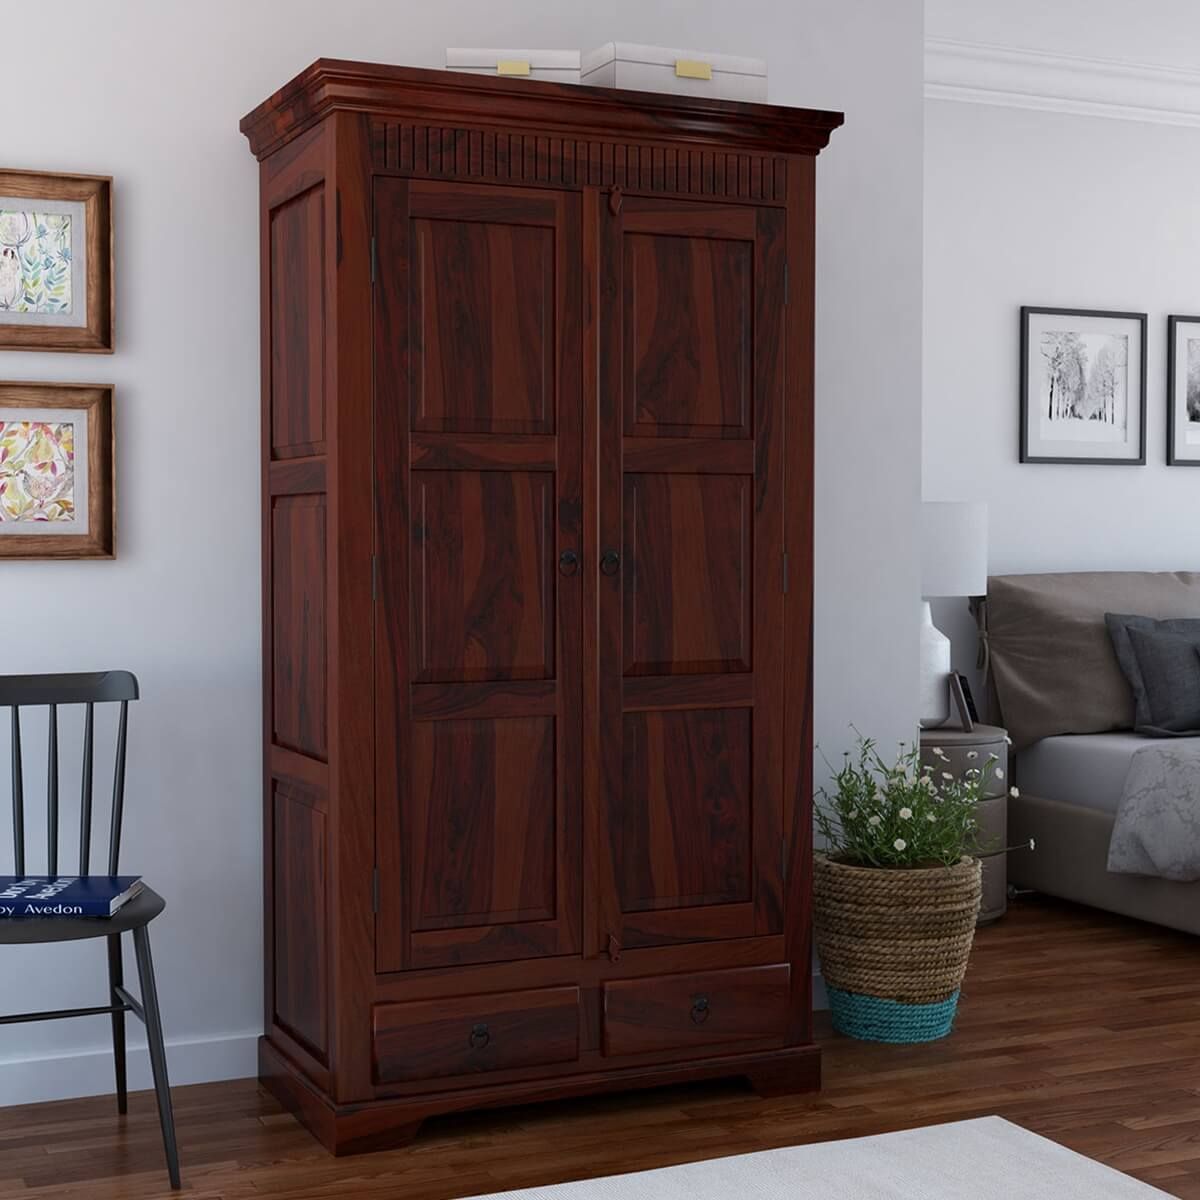 Marengo Rustic Solid Wood Large Wardrobe Armoire W Shelves And Drawers Intended For Solid Wood Wardrobes Closets (Photo 4 of 15)